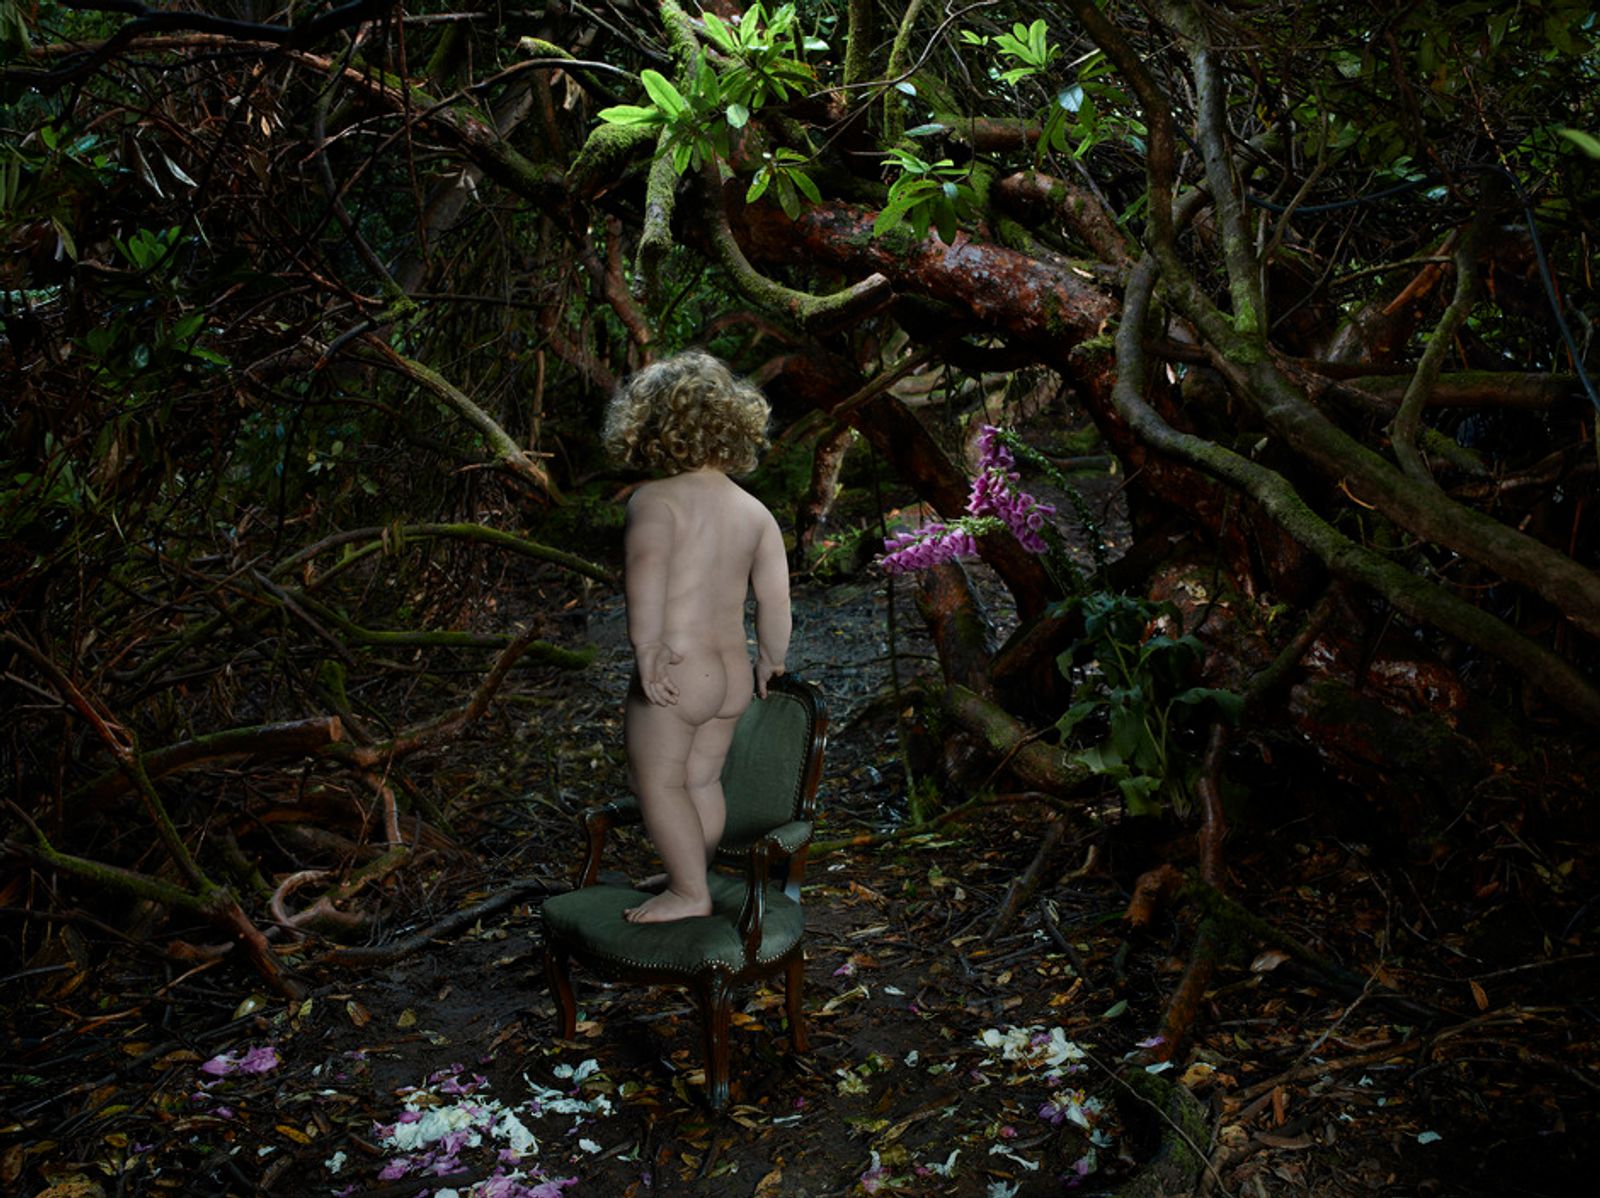 © Julia Fullerton-batten - Image from the Unadorned photography project